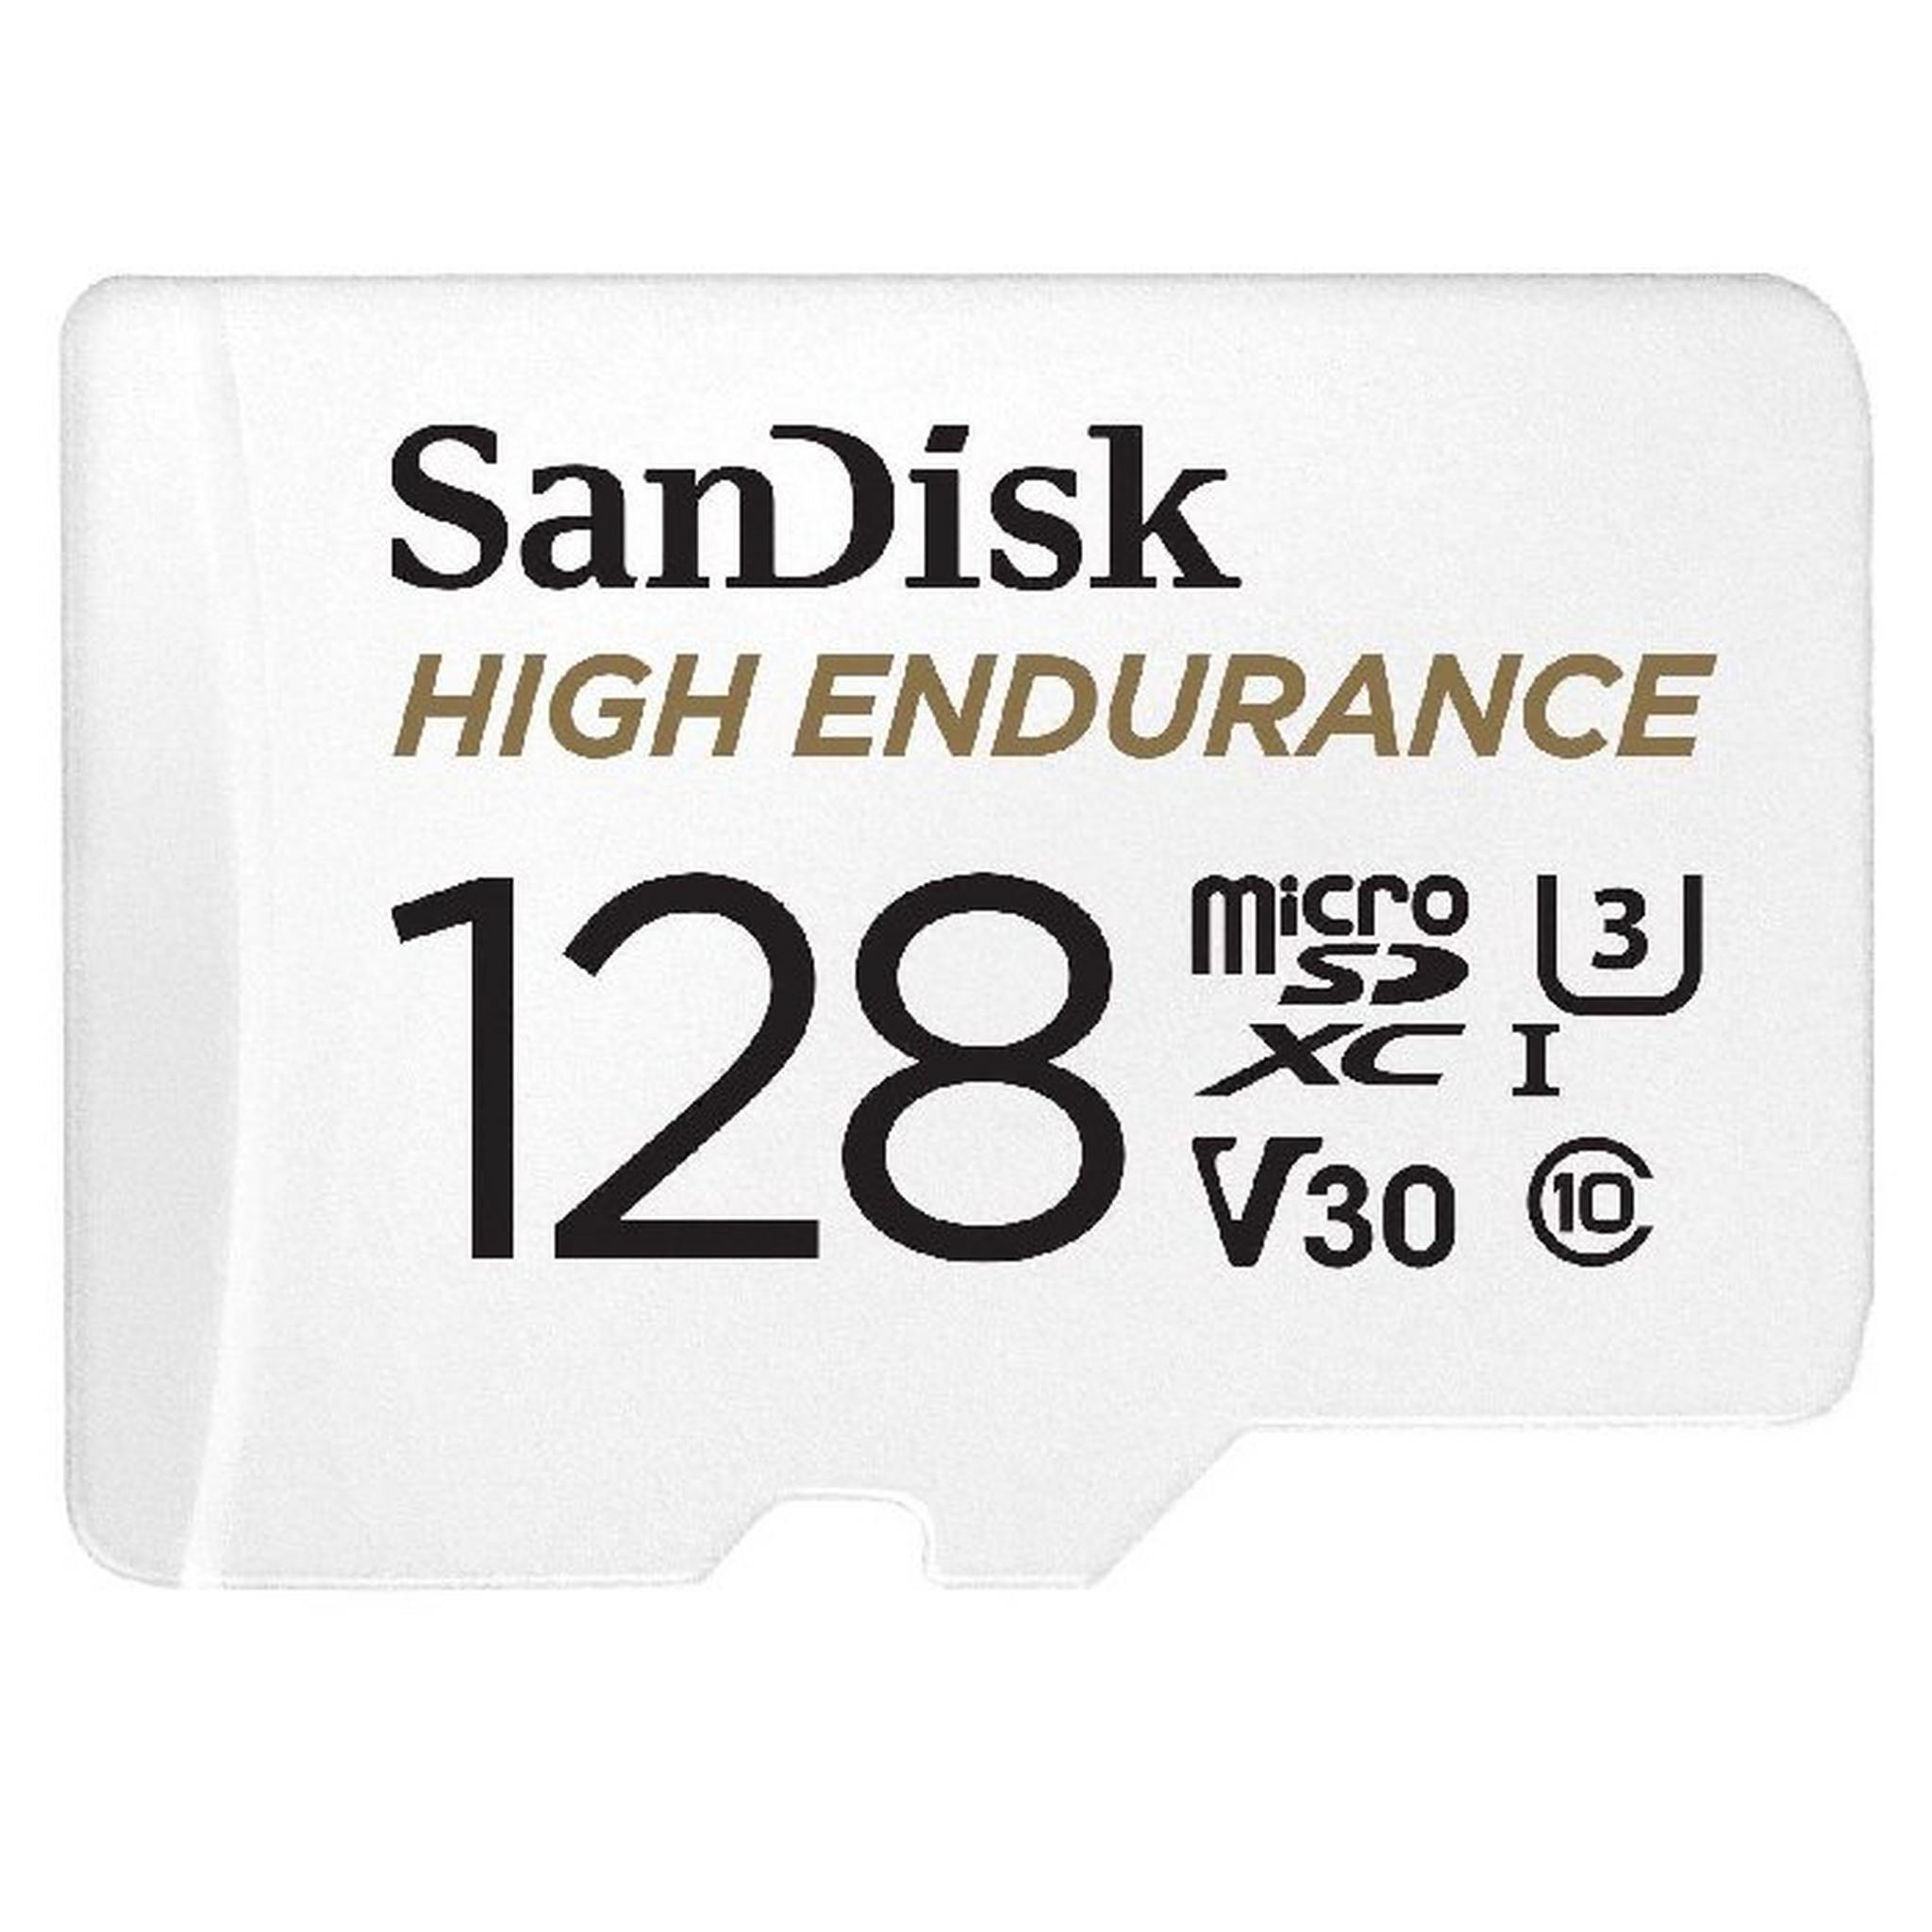 Sandisk Max Endurance Micro SDXC Card, 128GB, SD Adapter, SDSQQVR-128G-GN6IA - White